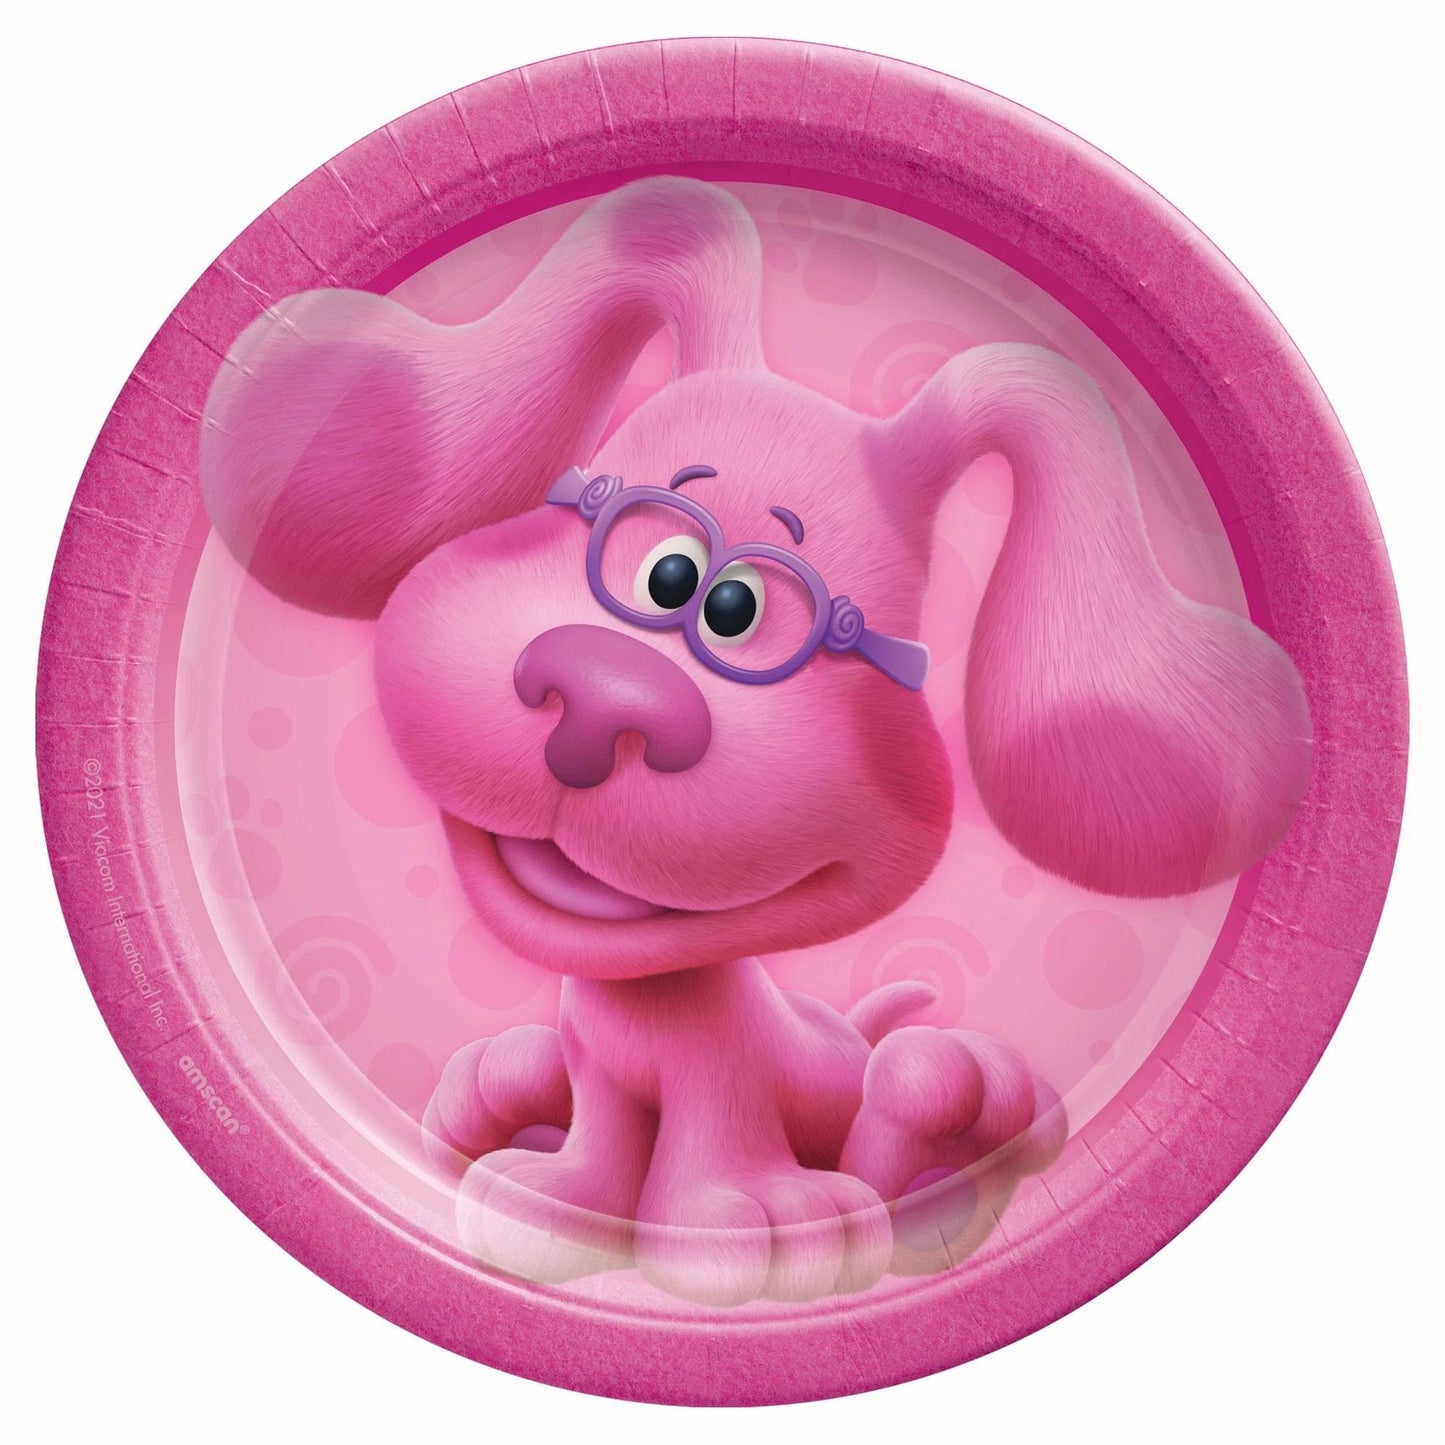 Blues Clues 7in Round Lunch Plates - Pink